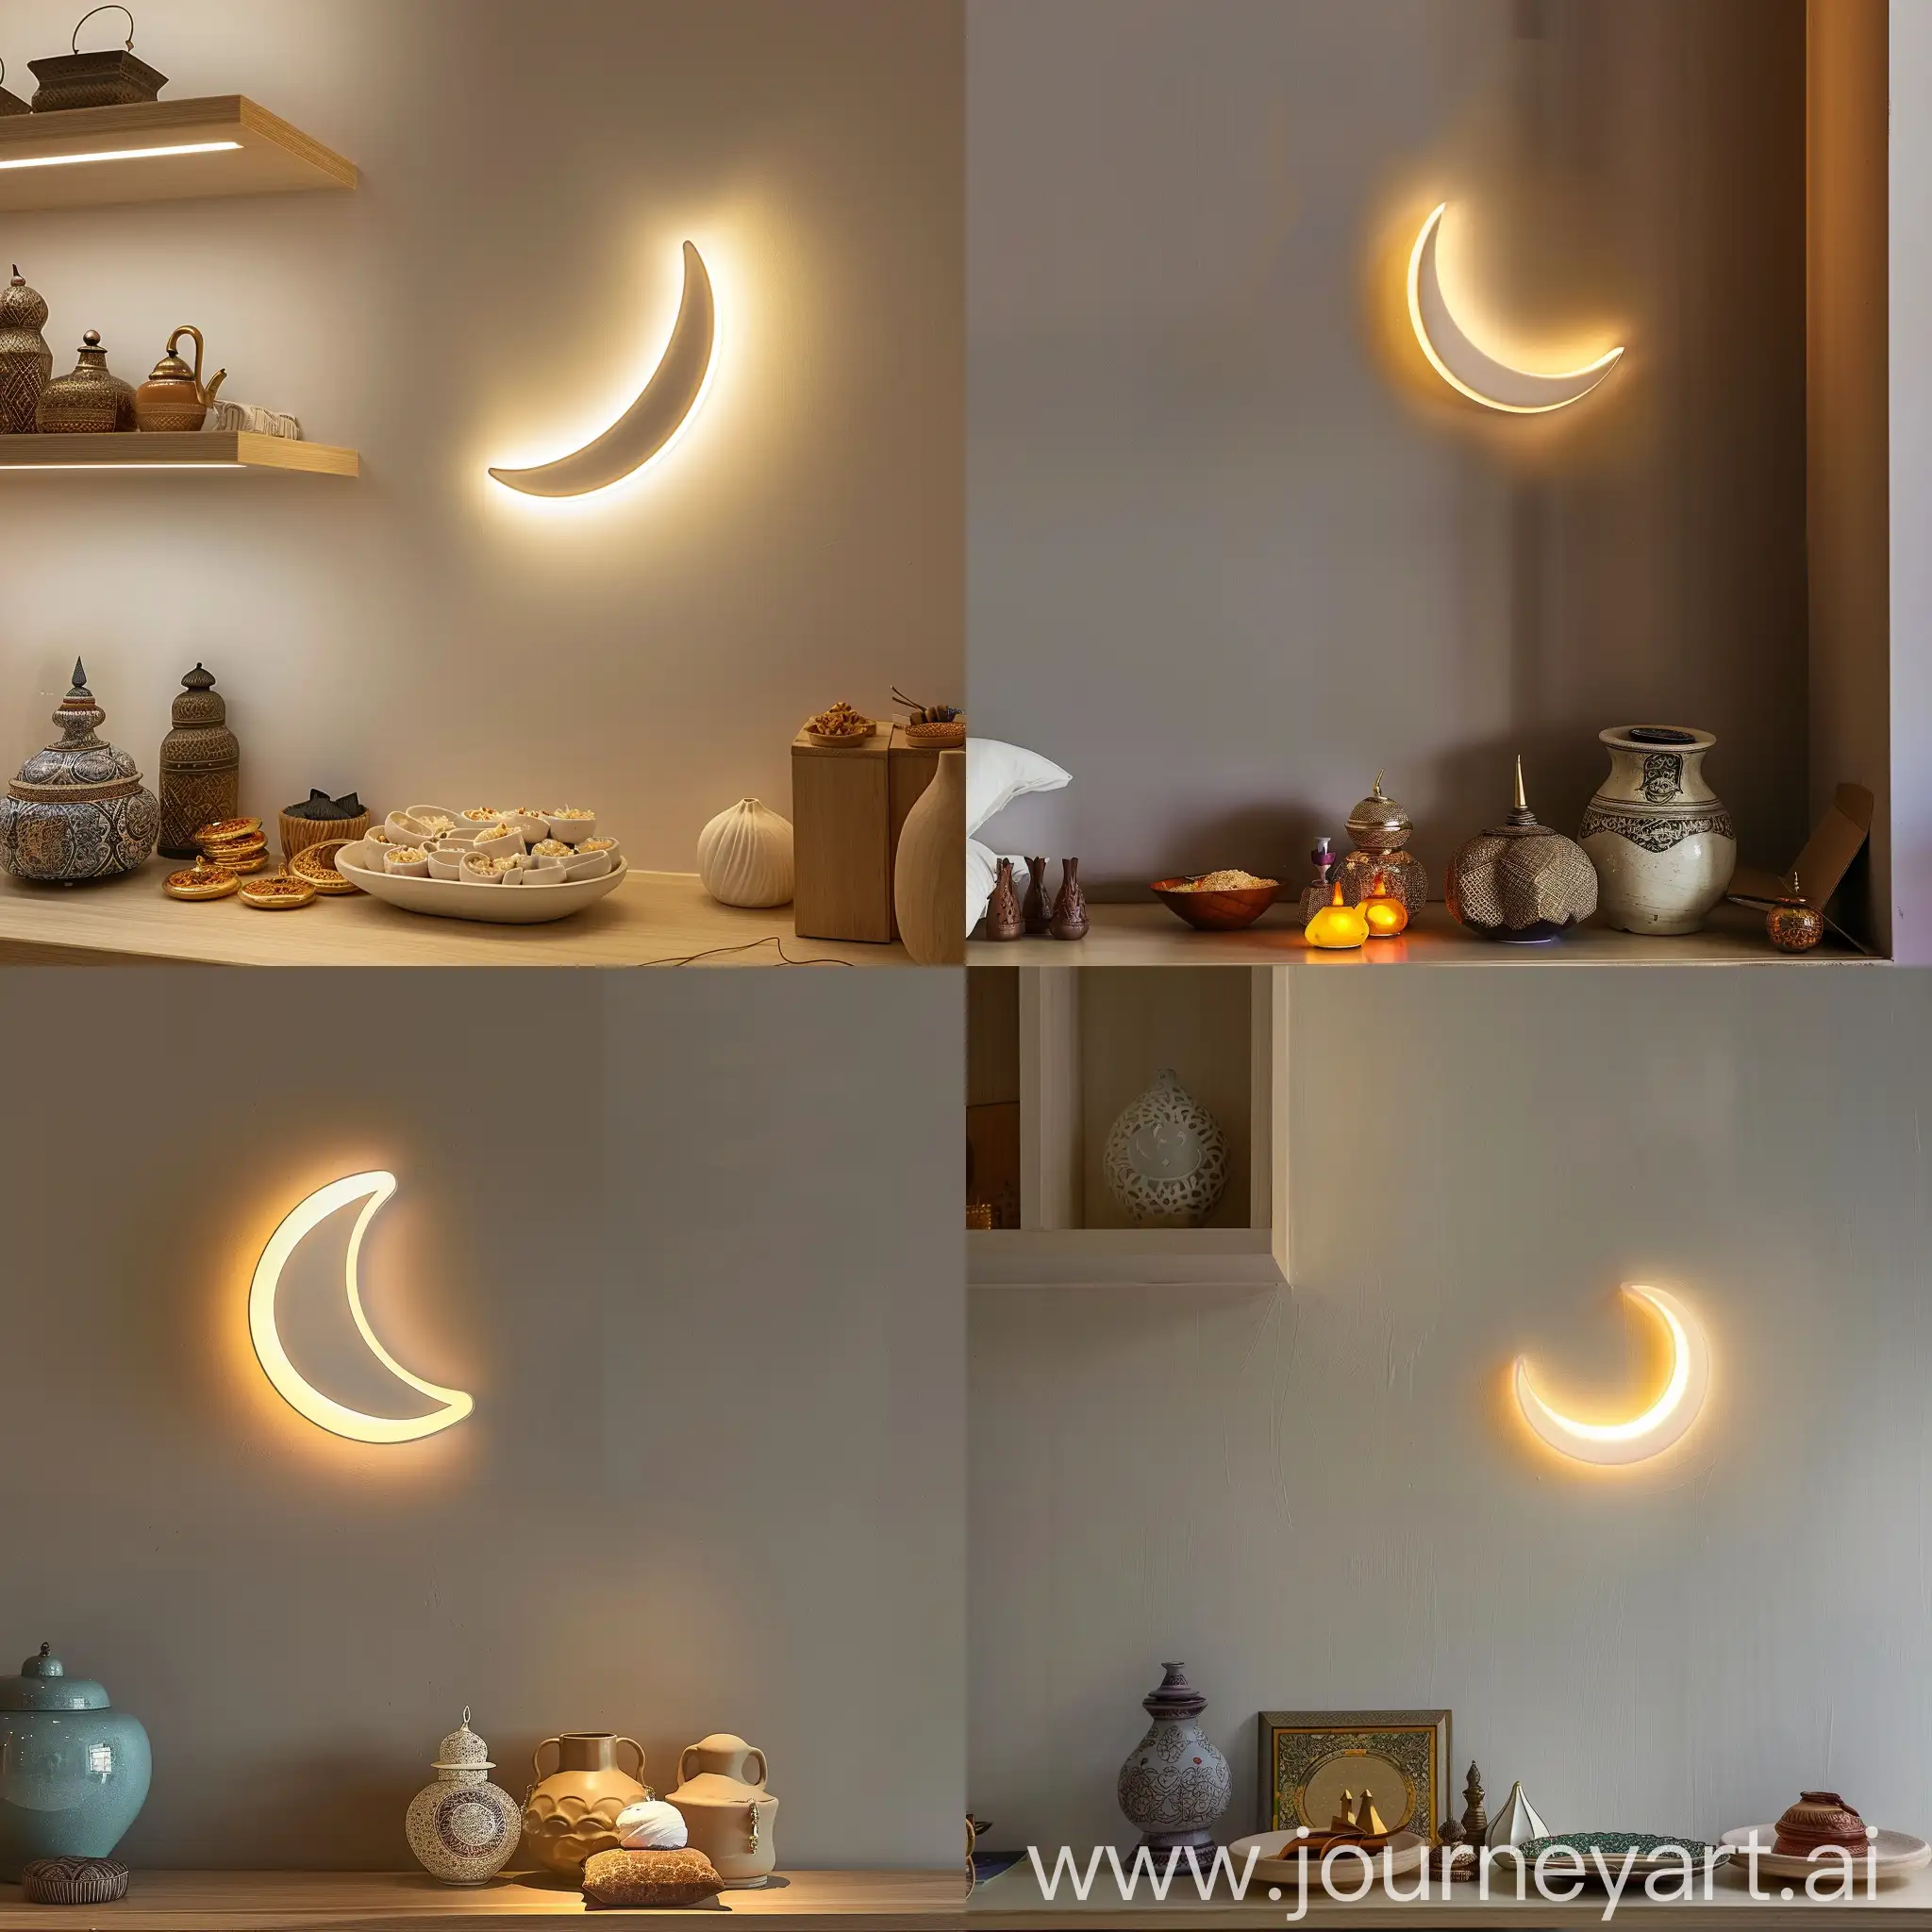 Designing an interior scene in the atmosphere of the month of Ramadan. on the wall a small lighting unit in the shape of a luminous crescent in white. There are some  islamic Ramadan decorative accessories next to it.
